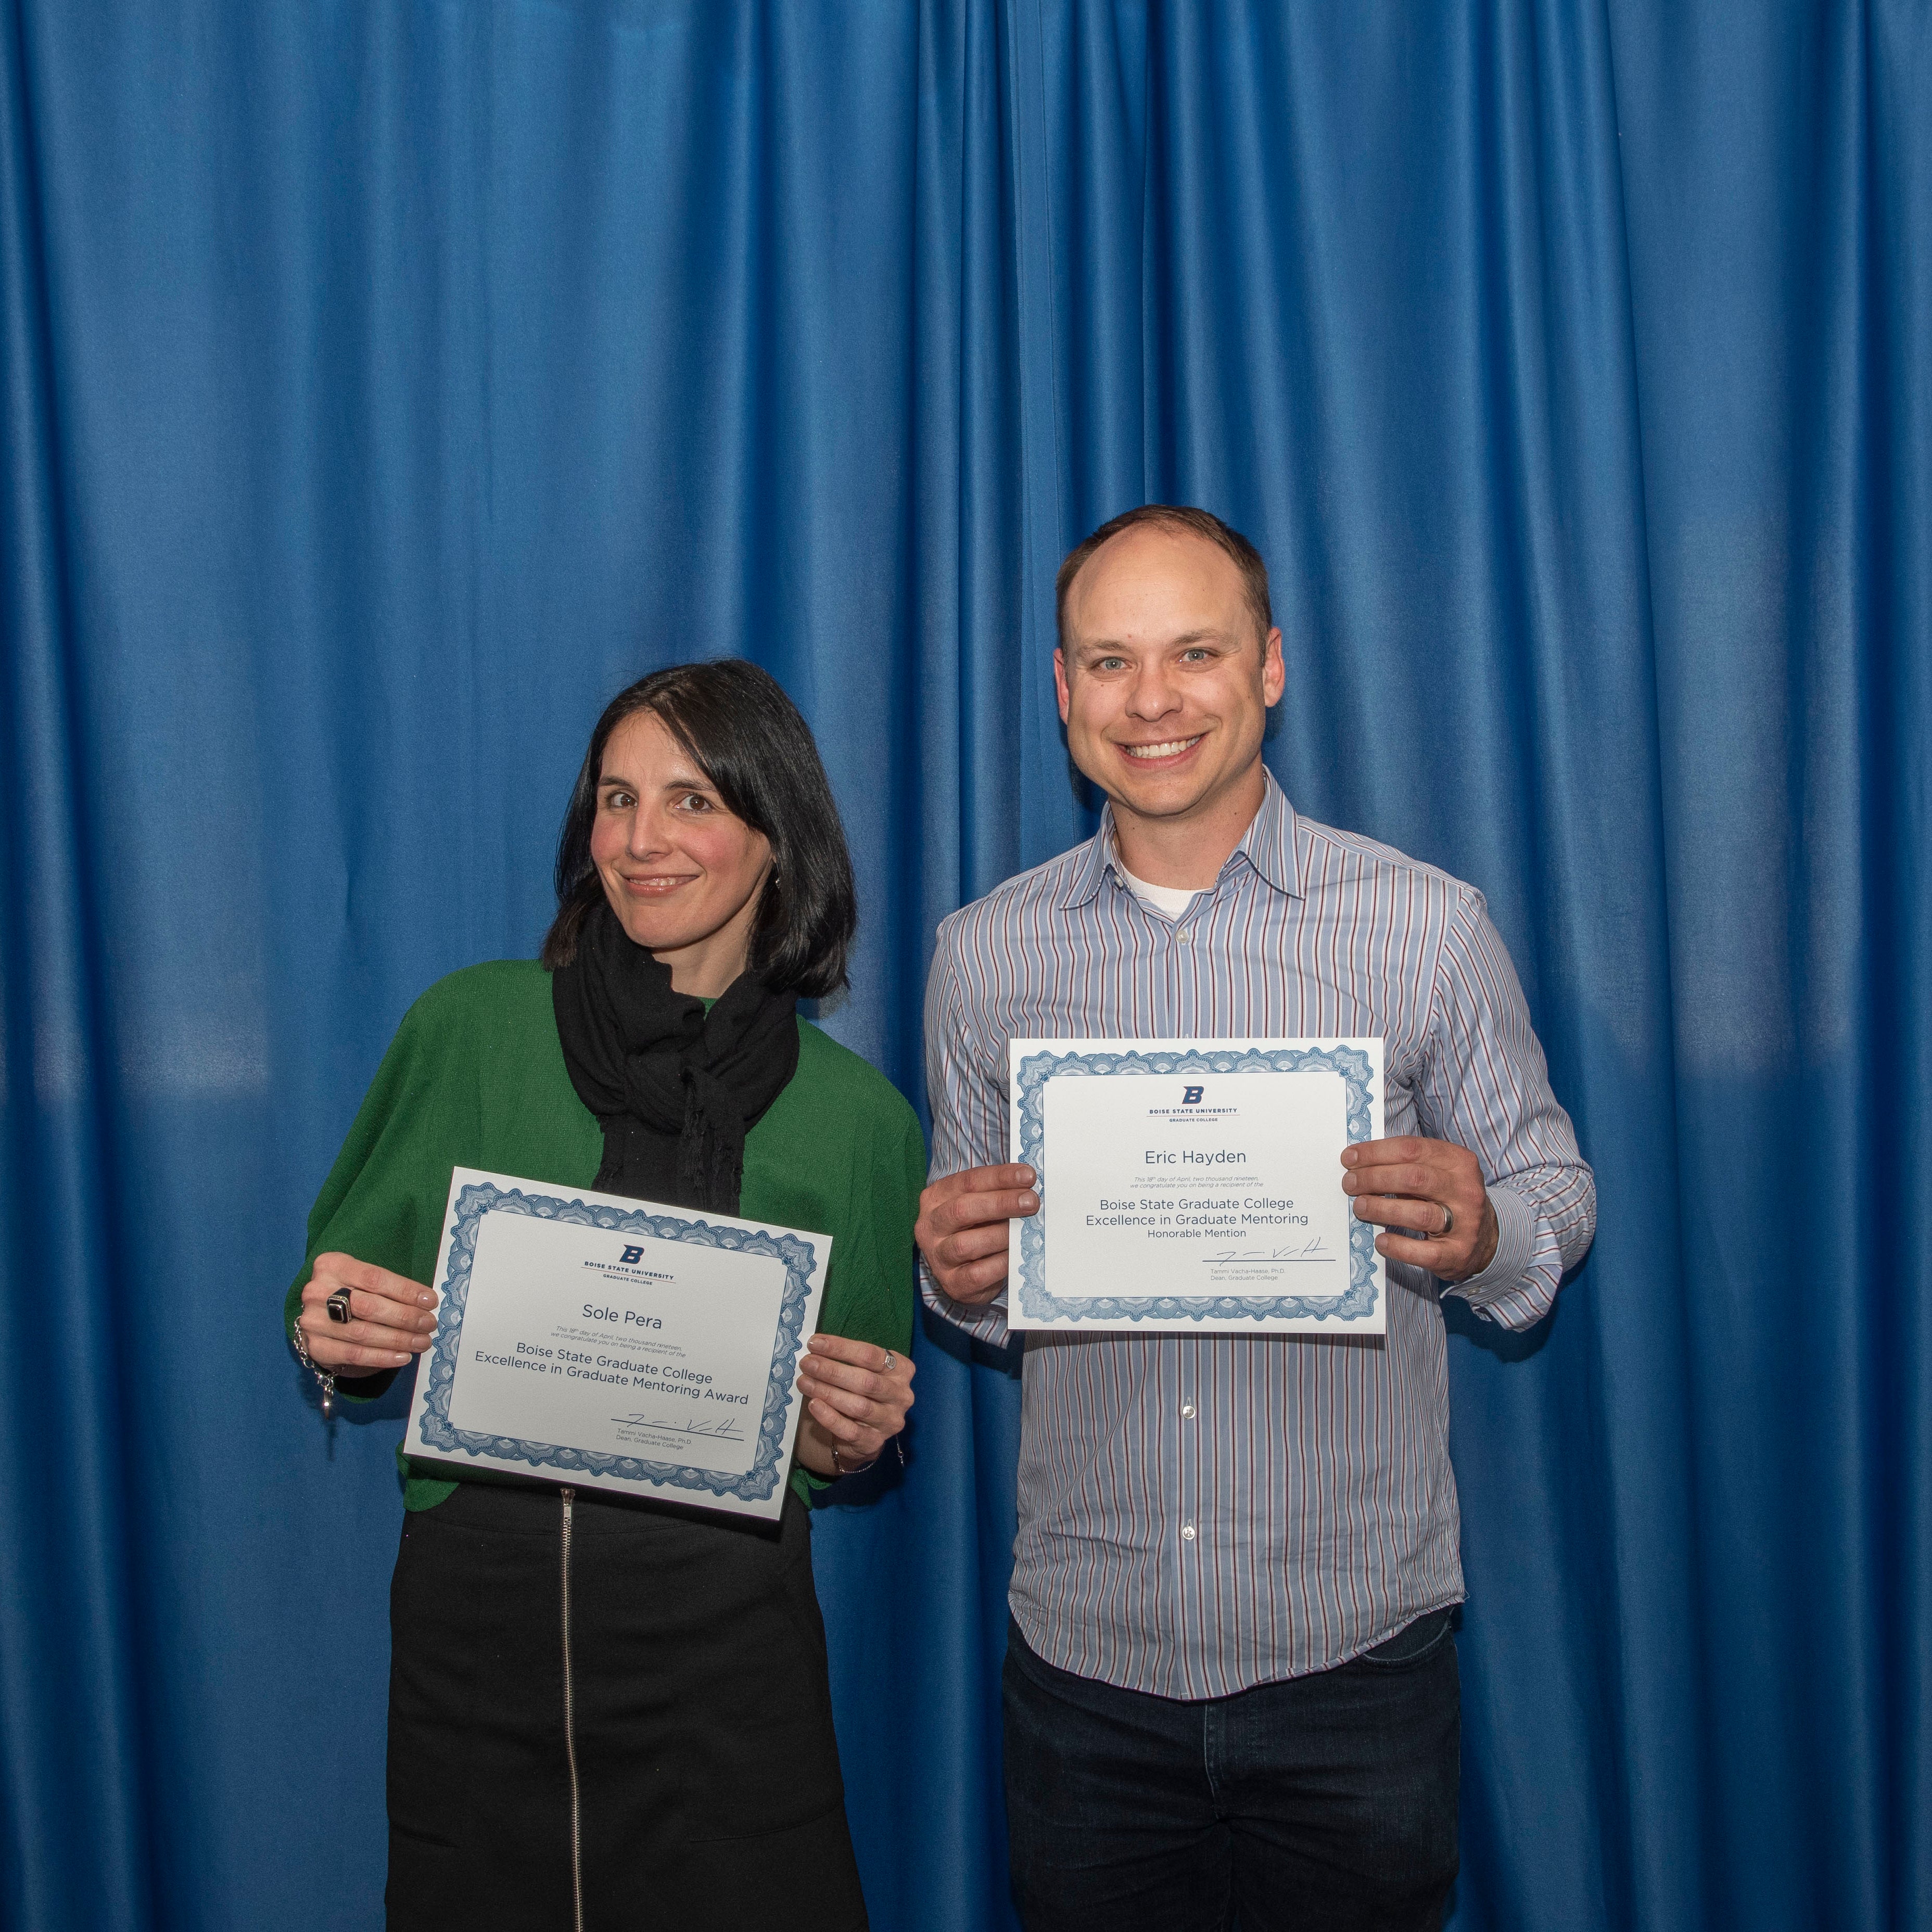 Graduate College Awards Ceremony, two graduate faculty award winners pictured